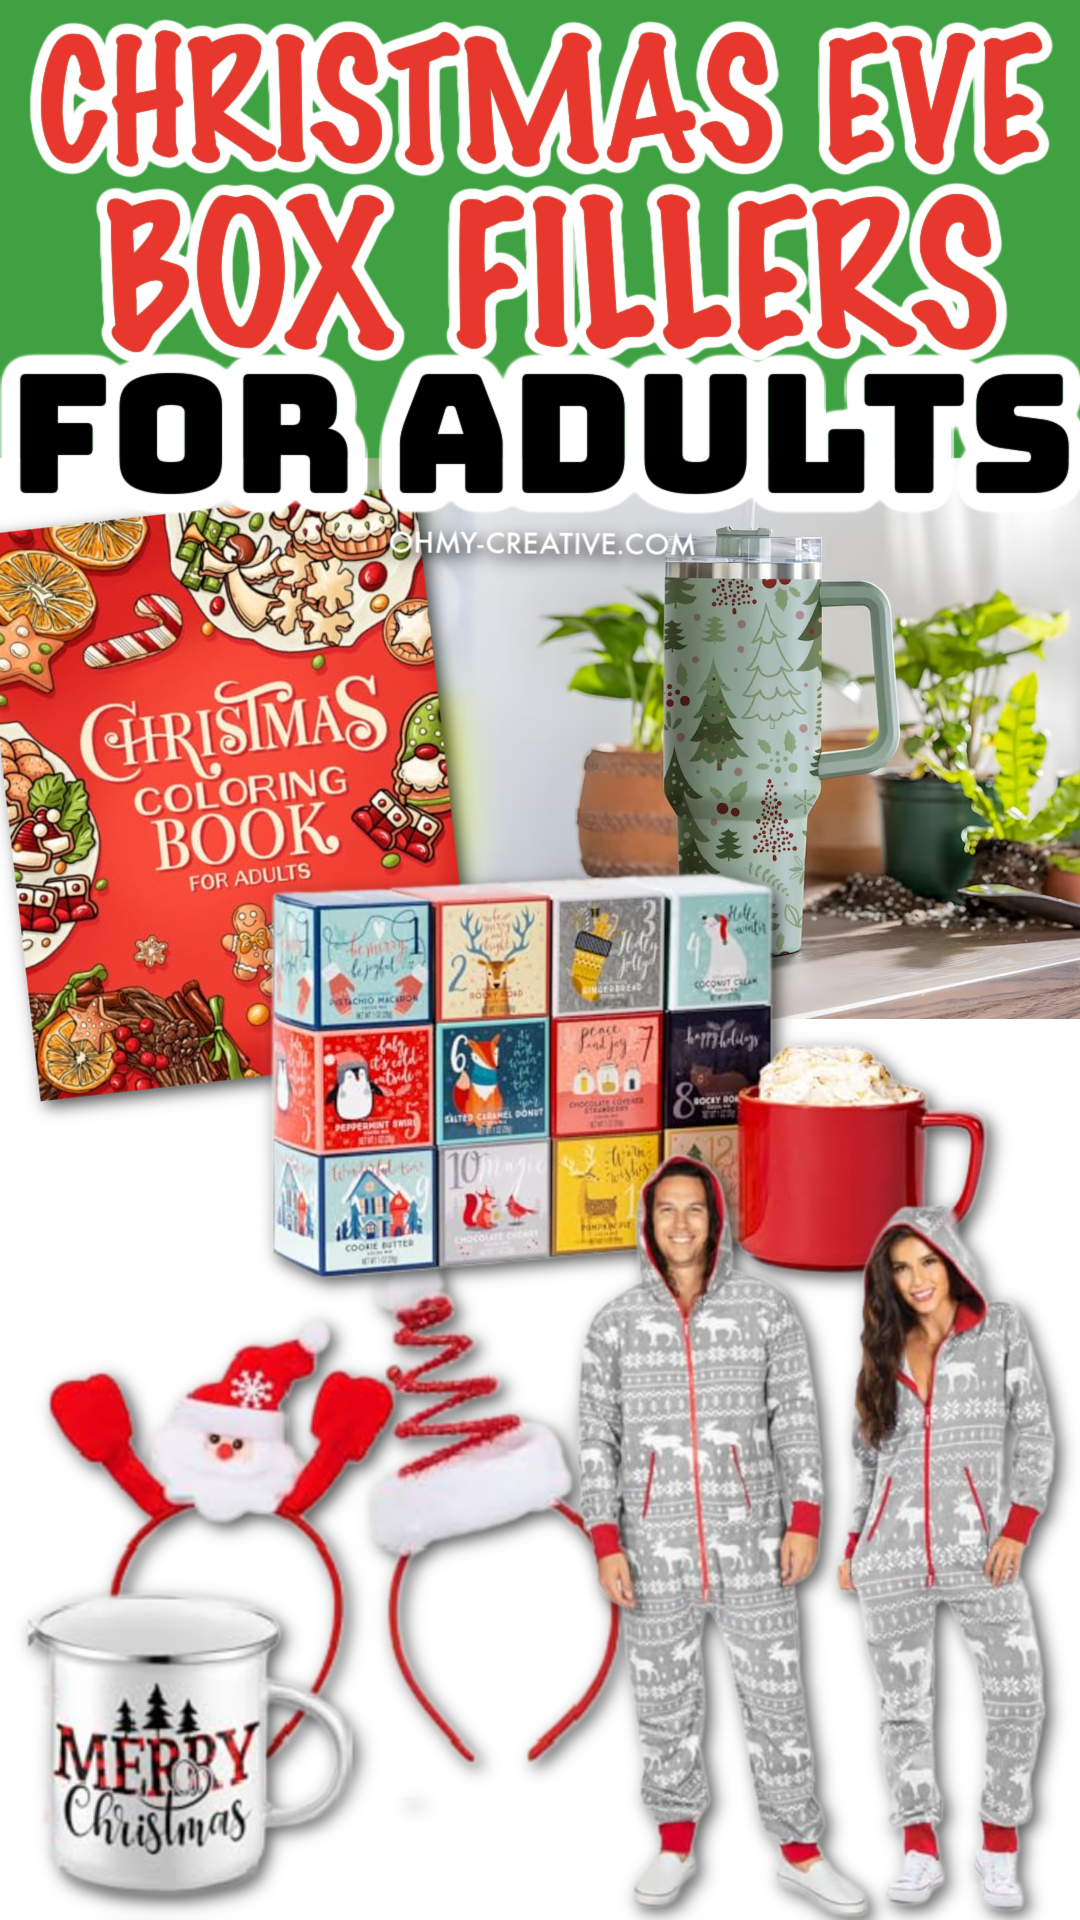 Christmas Eve Box Fillers For Adults